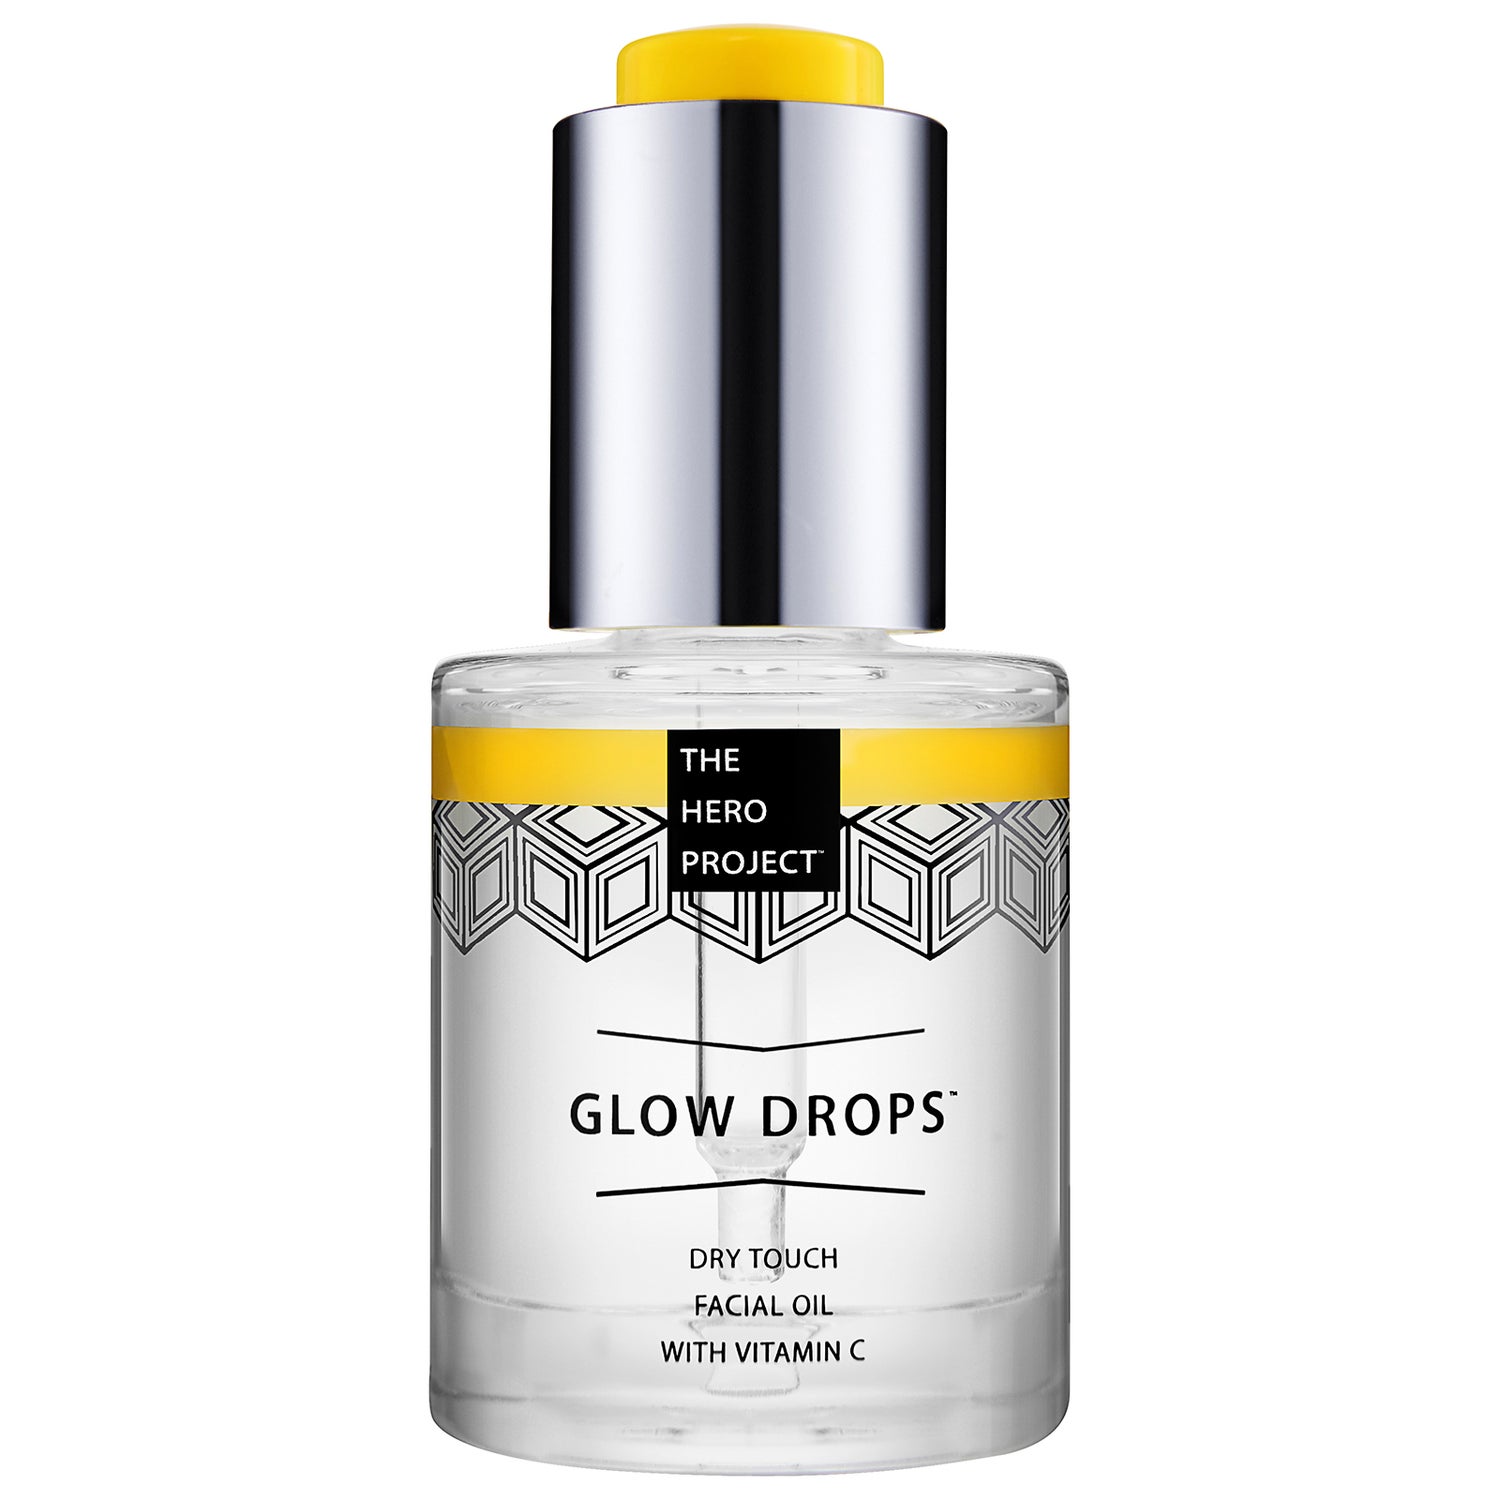 The Hero Project Glow Drops Dry Touch Facial Oil + Vitamin C 30ml